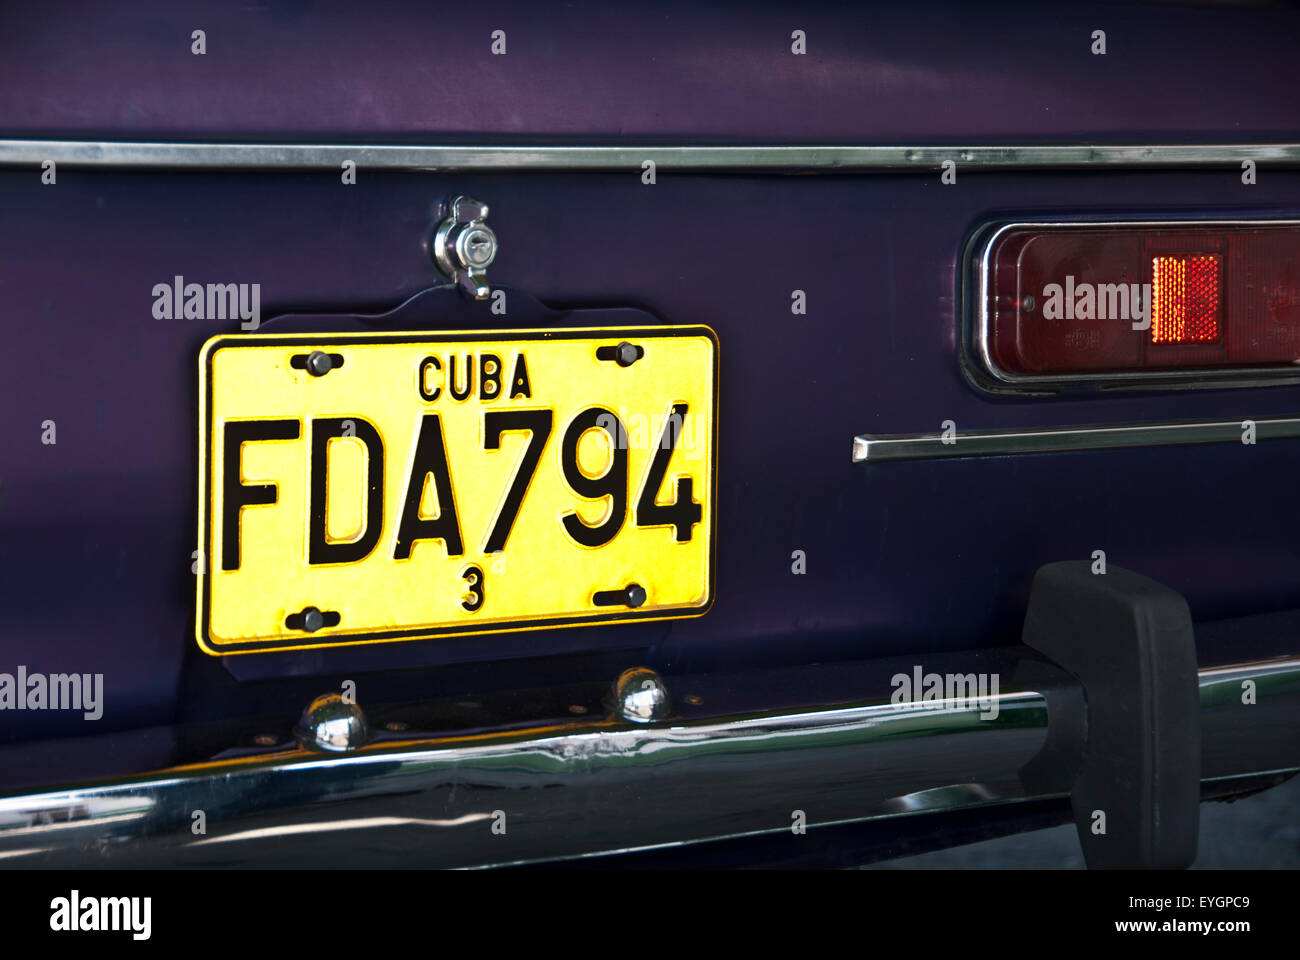 Vintage Russian car in Cuba showing number plate Stock Photo